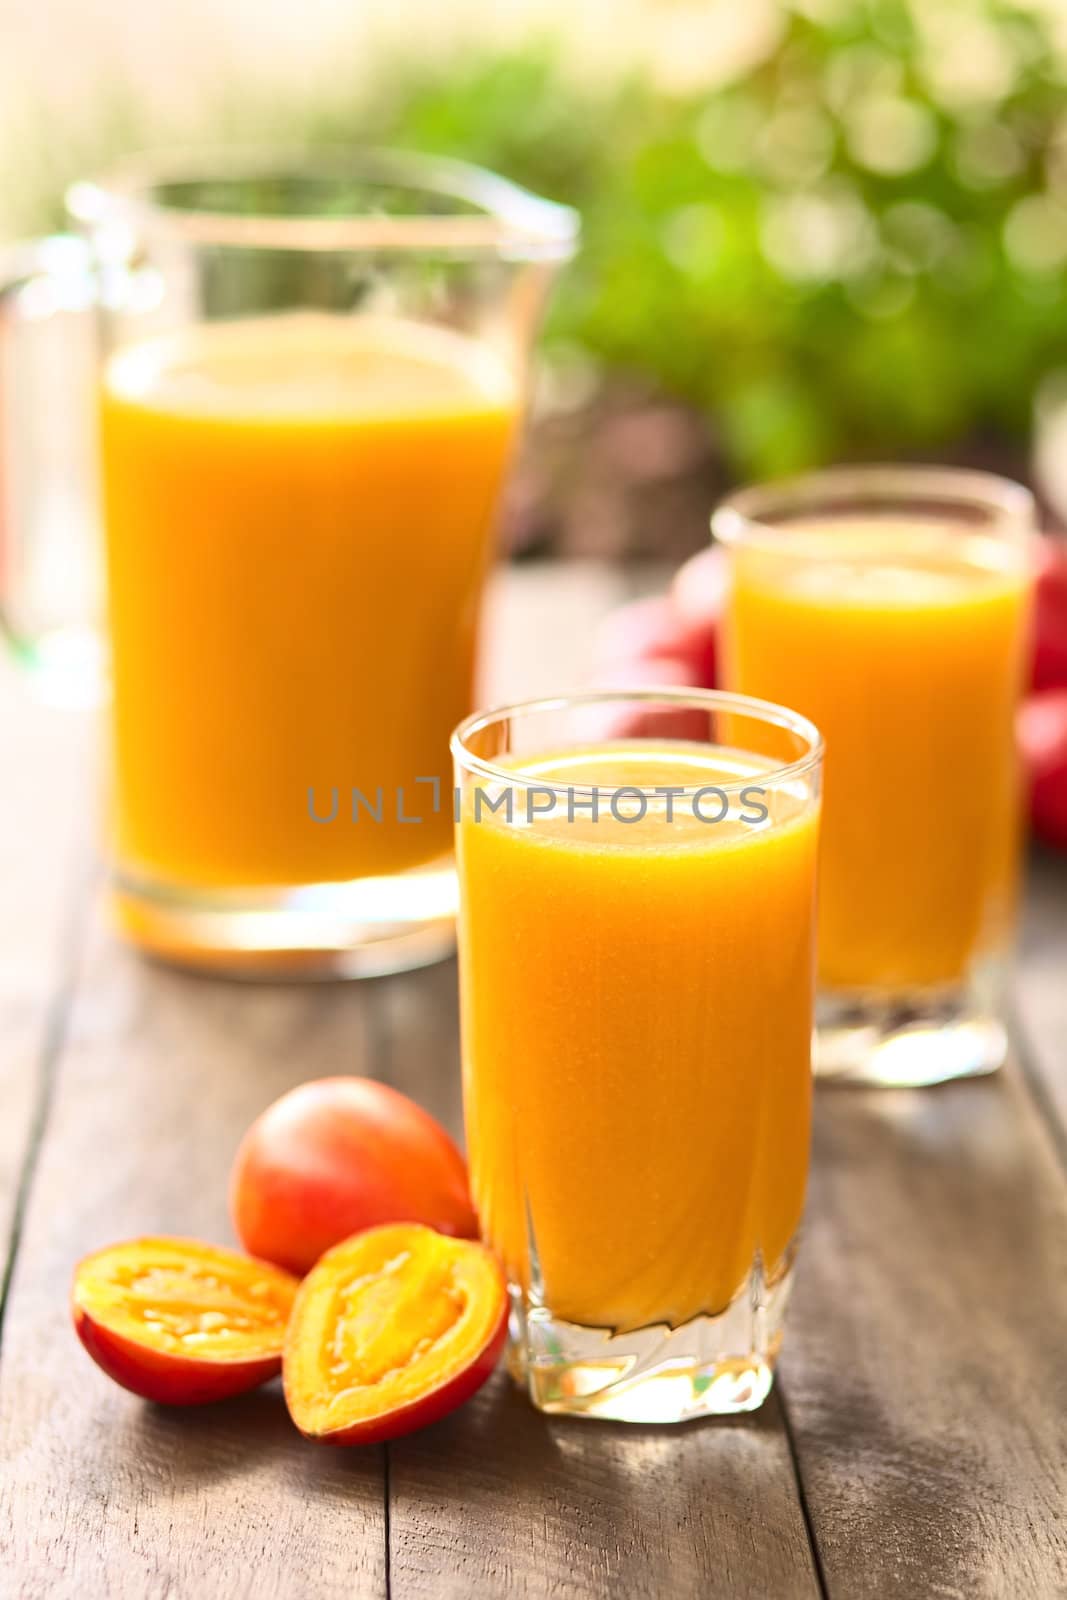 Fresh juice out of tamarillo fruits (lat. Solanum betaceum) on a table outdoors (Selective Focus, Focus on the front rim of the glass)